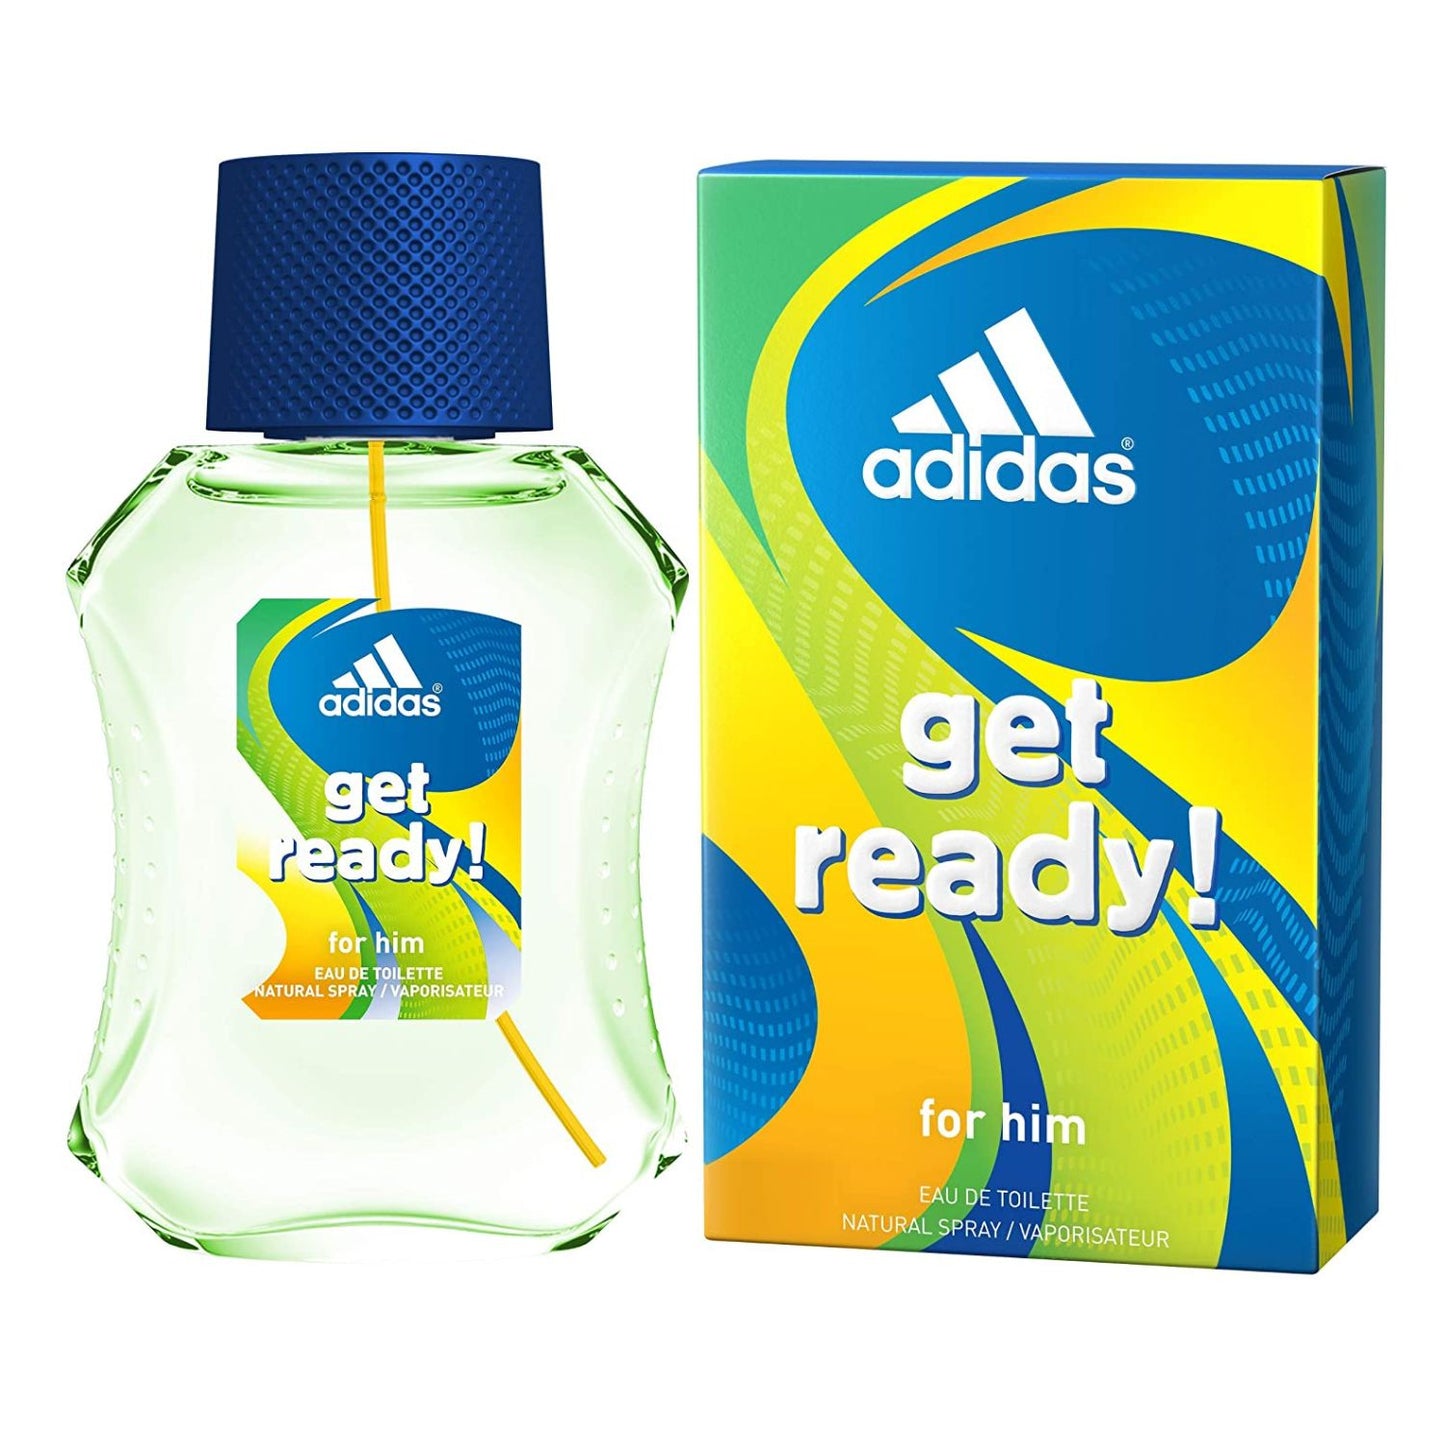 Bid on 300 X BOTTLES OF ADIDAS FRAGRANCE GET READY FOR HIM COLOGNES, 1.7 OZ- Buy &amp; Sell on Auction with EAMA Group